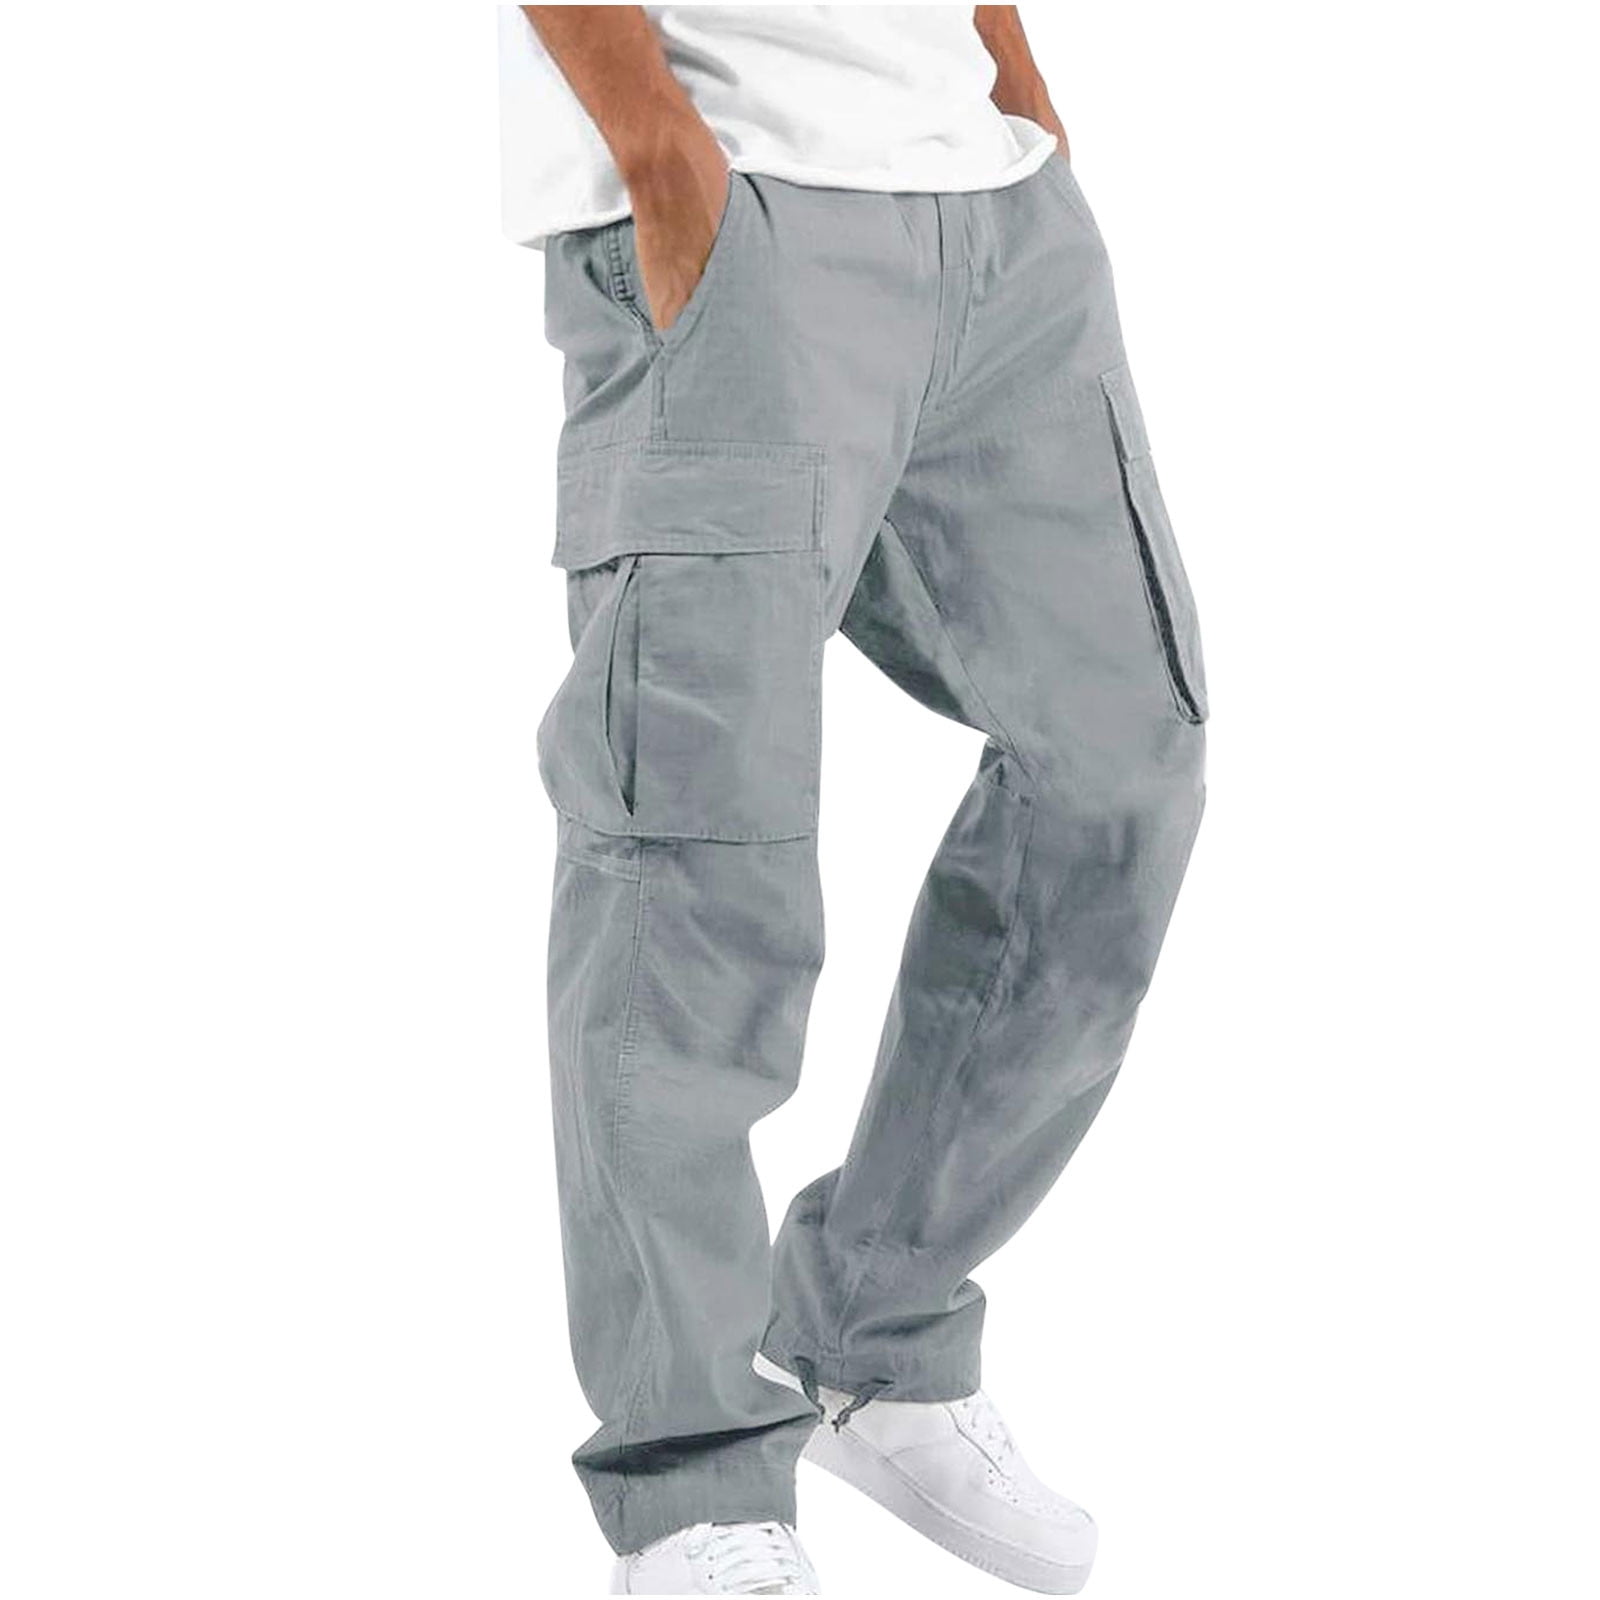 Frostluinai Cargo Pants For Men Athletic Casual Outdoor Resistant